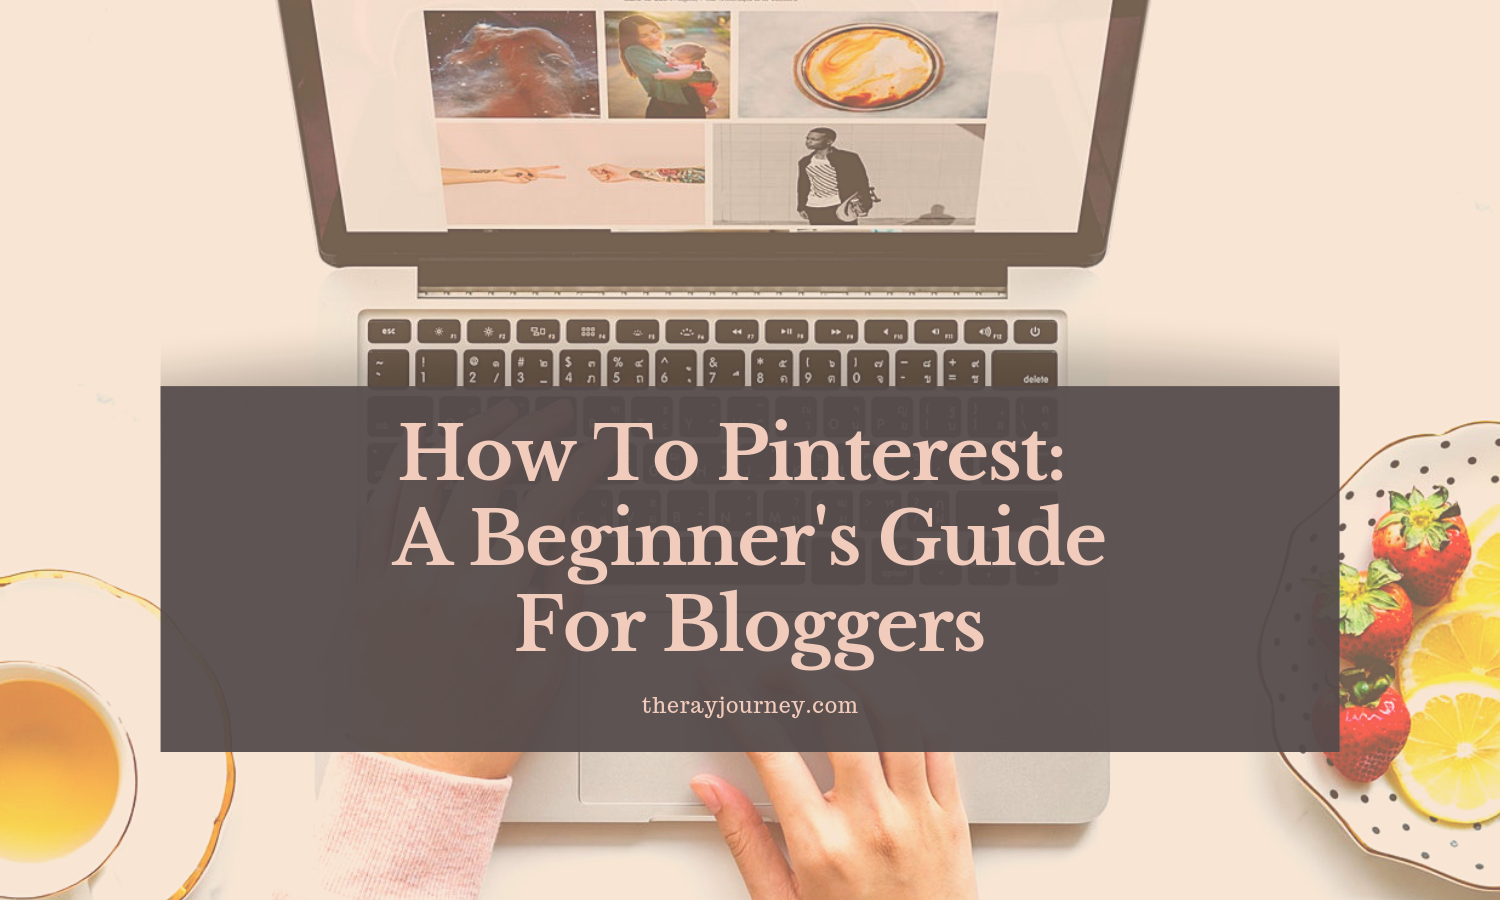 How To Pinterest: A Beginner’s Guide For Bloggers